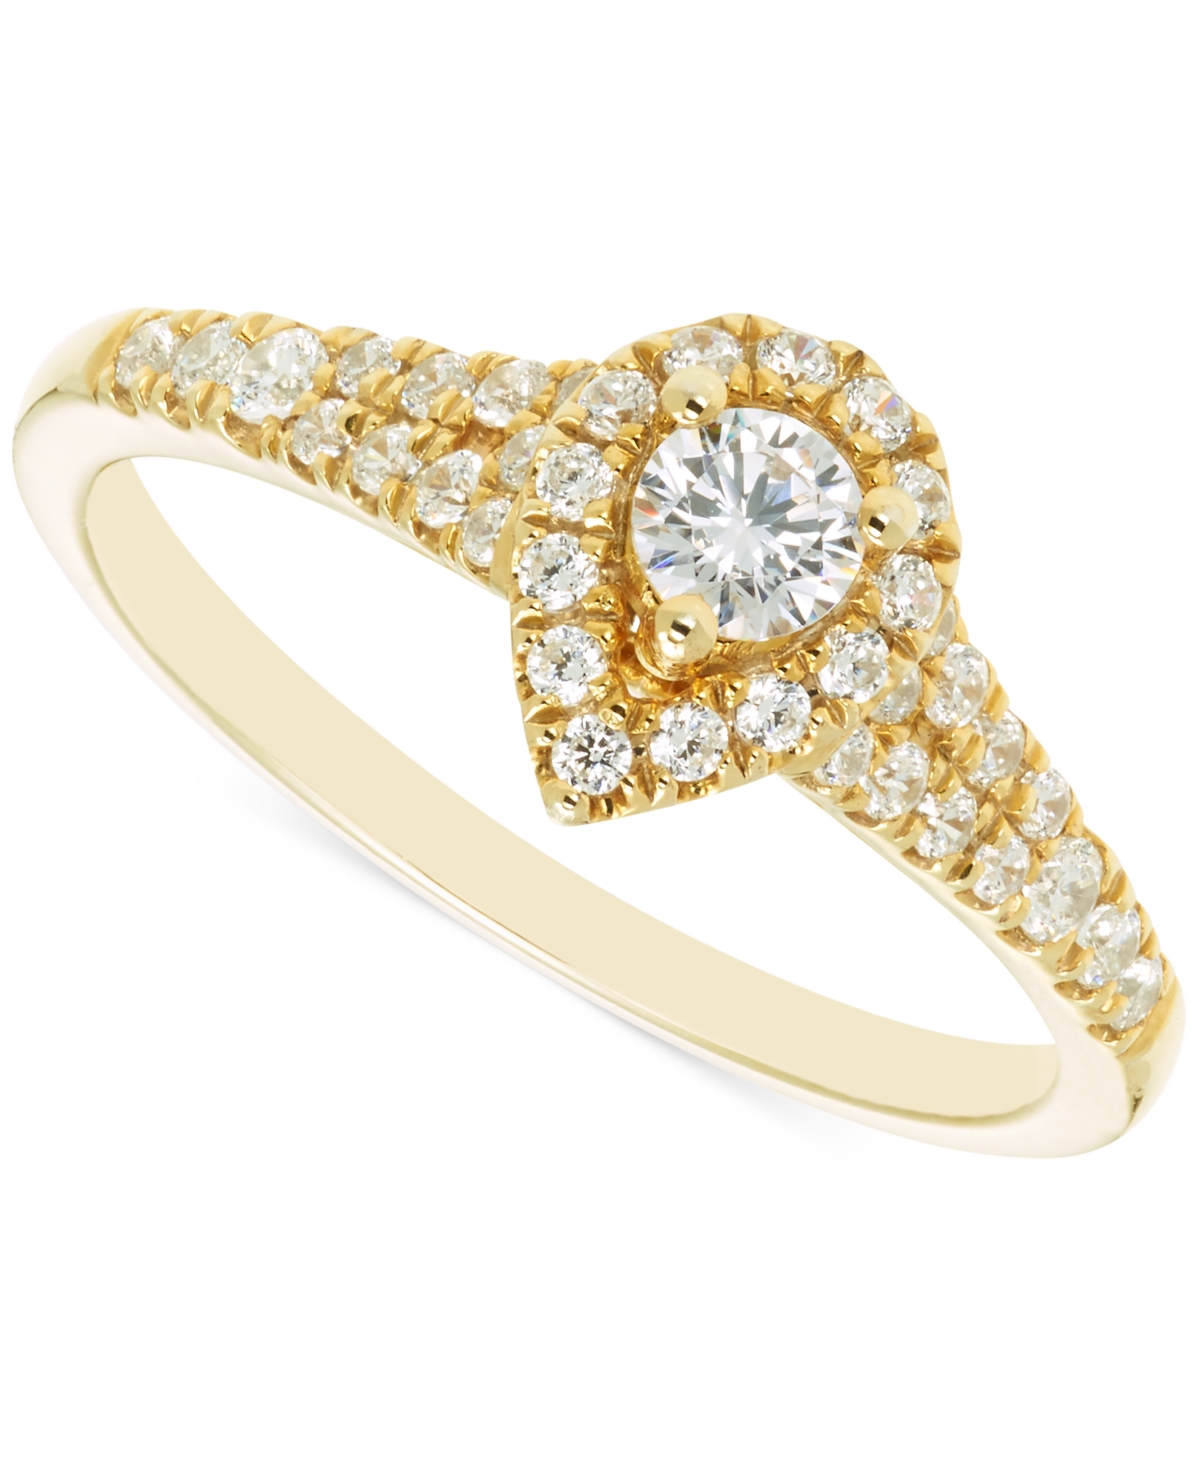 Diamond Halo Engagement Ring (1/2 ct. t.w.) in 14k Gold - Yellow Gold